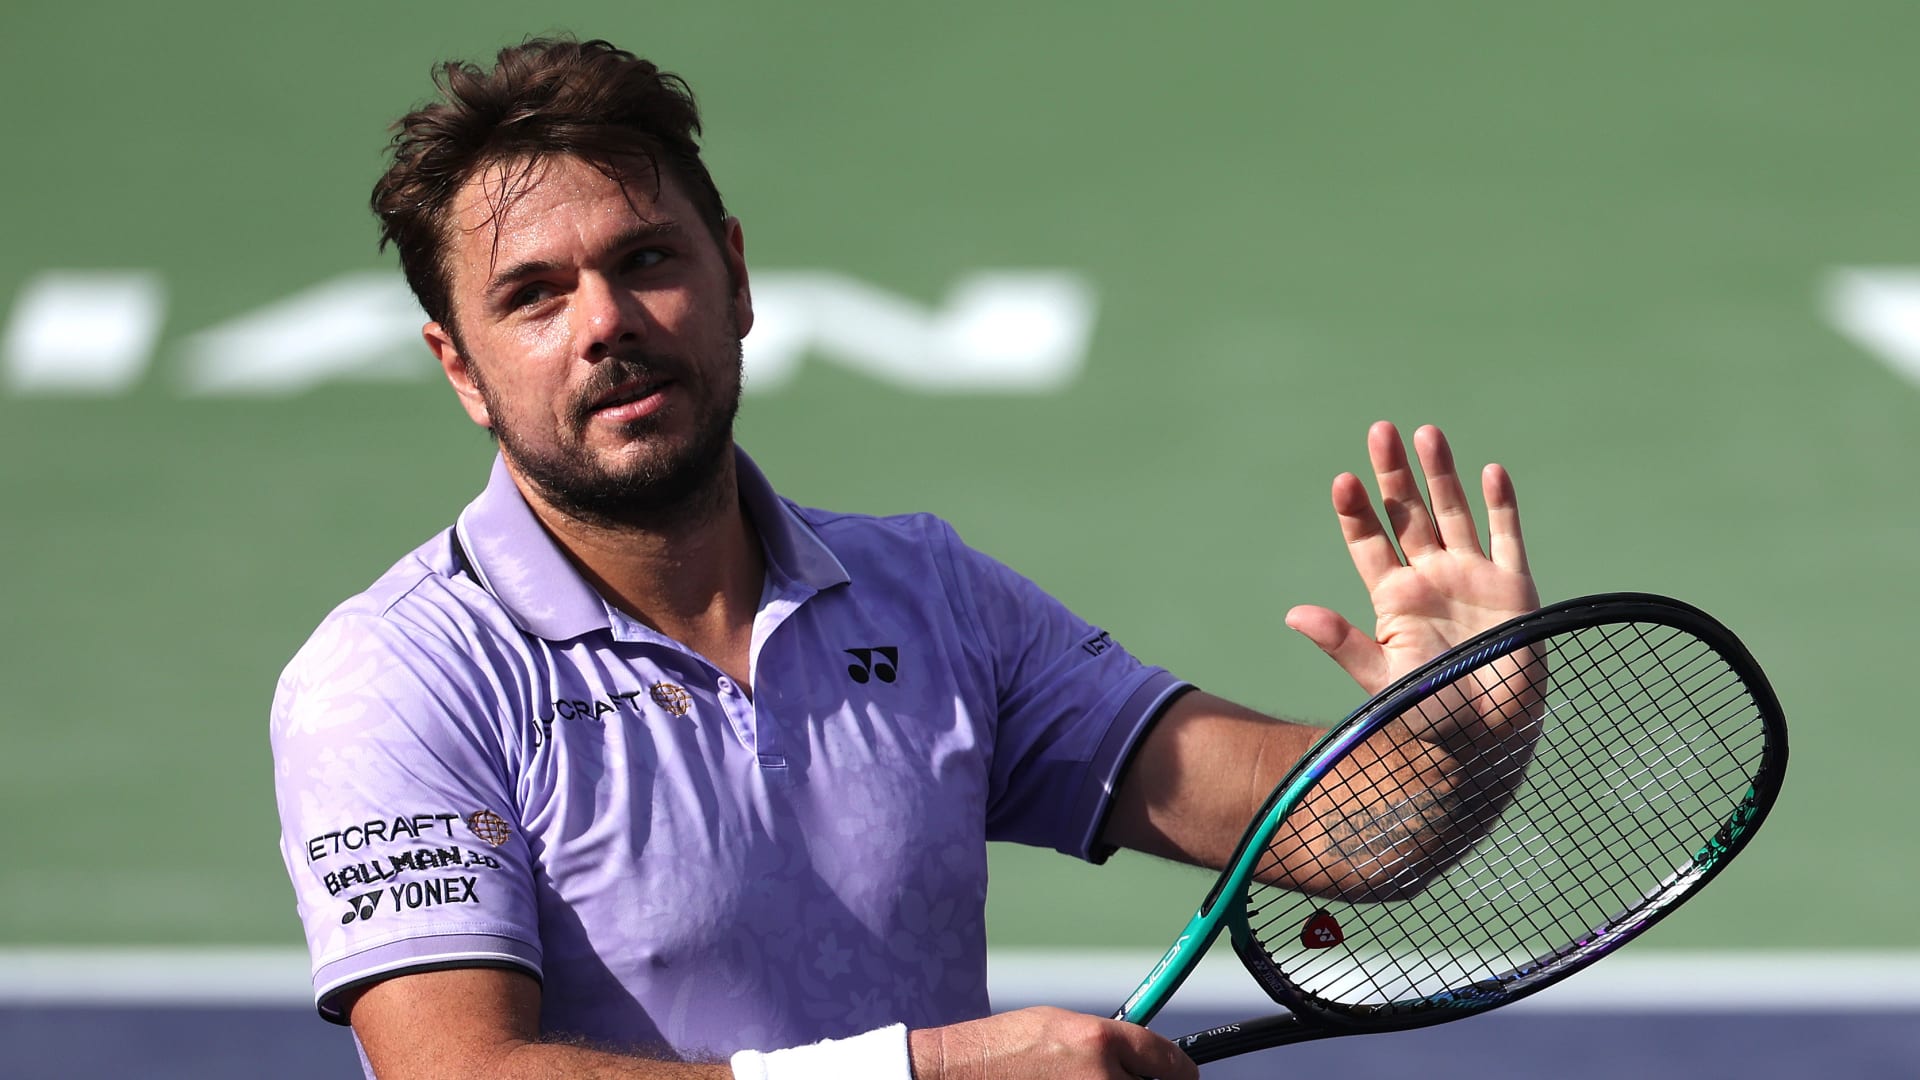 Stat of the Day Stan Wawrinka records 550th win of career with upset over Rune at Indian Wells